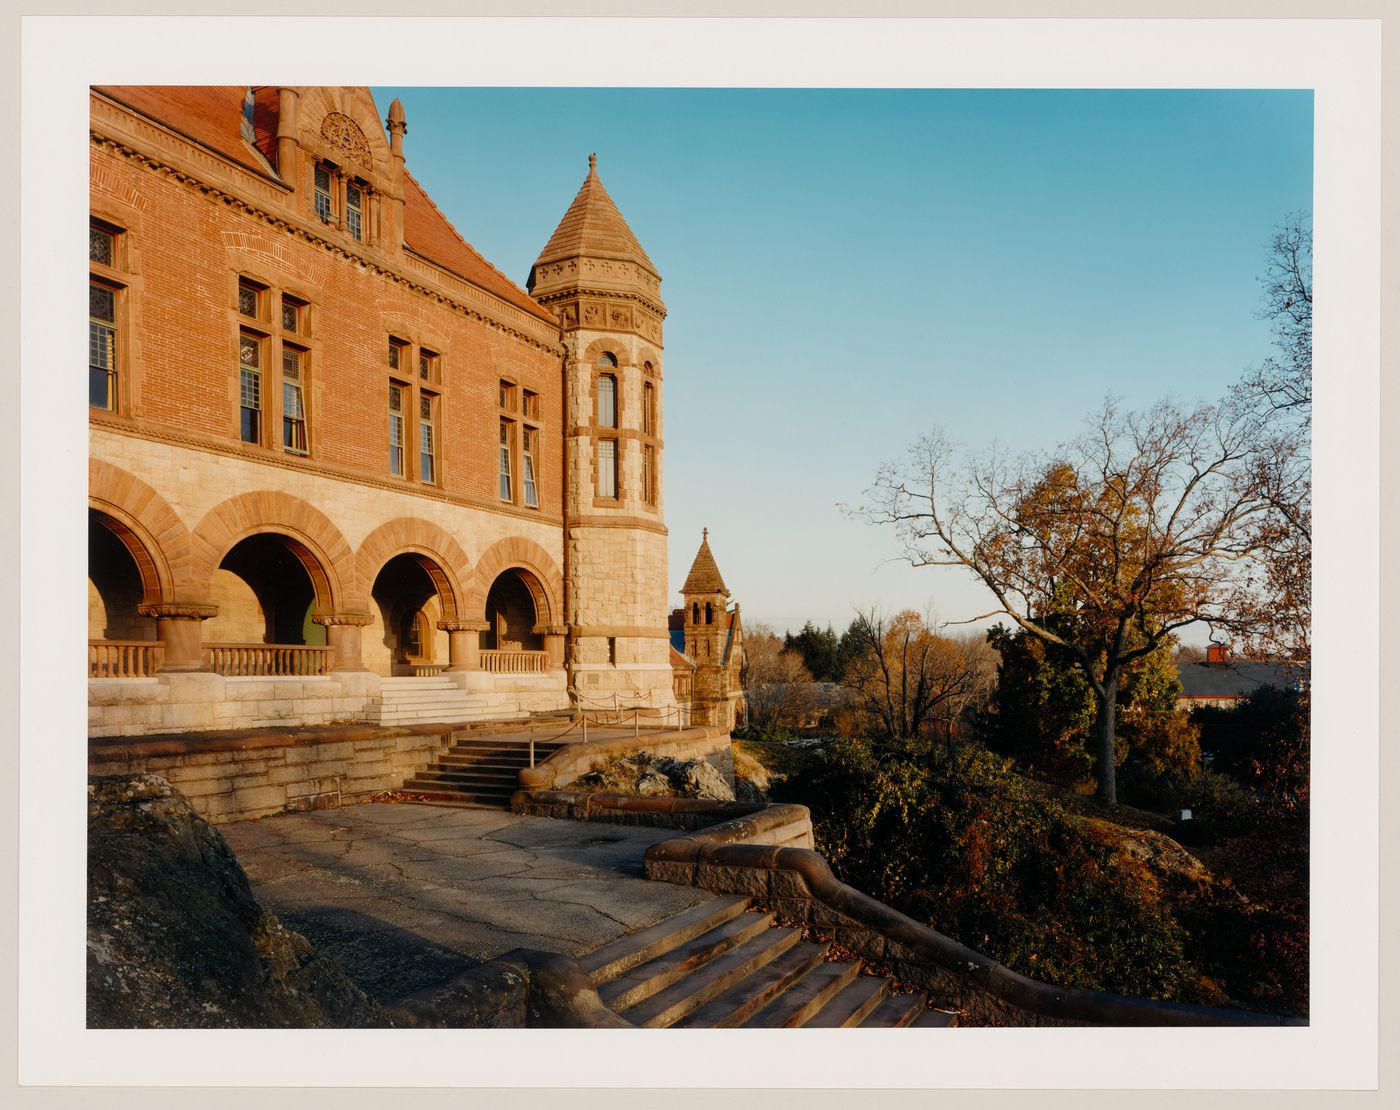 Viewing Olmsted: View of Memorial Hall and Library, North Easton, Massachusetts